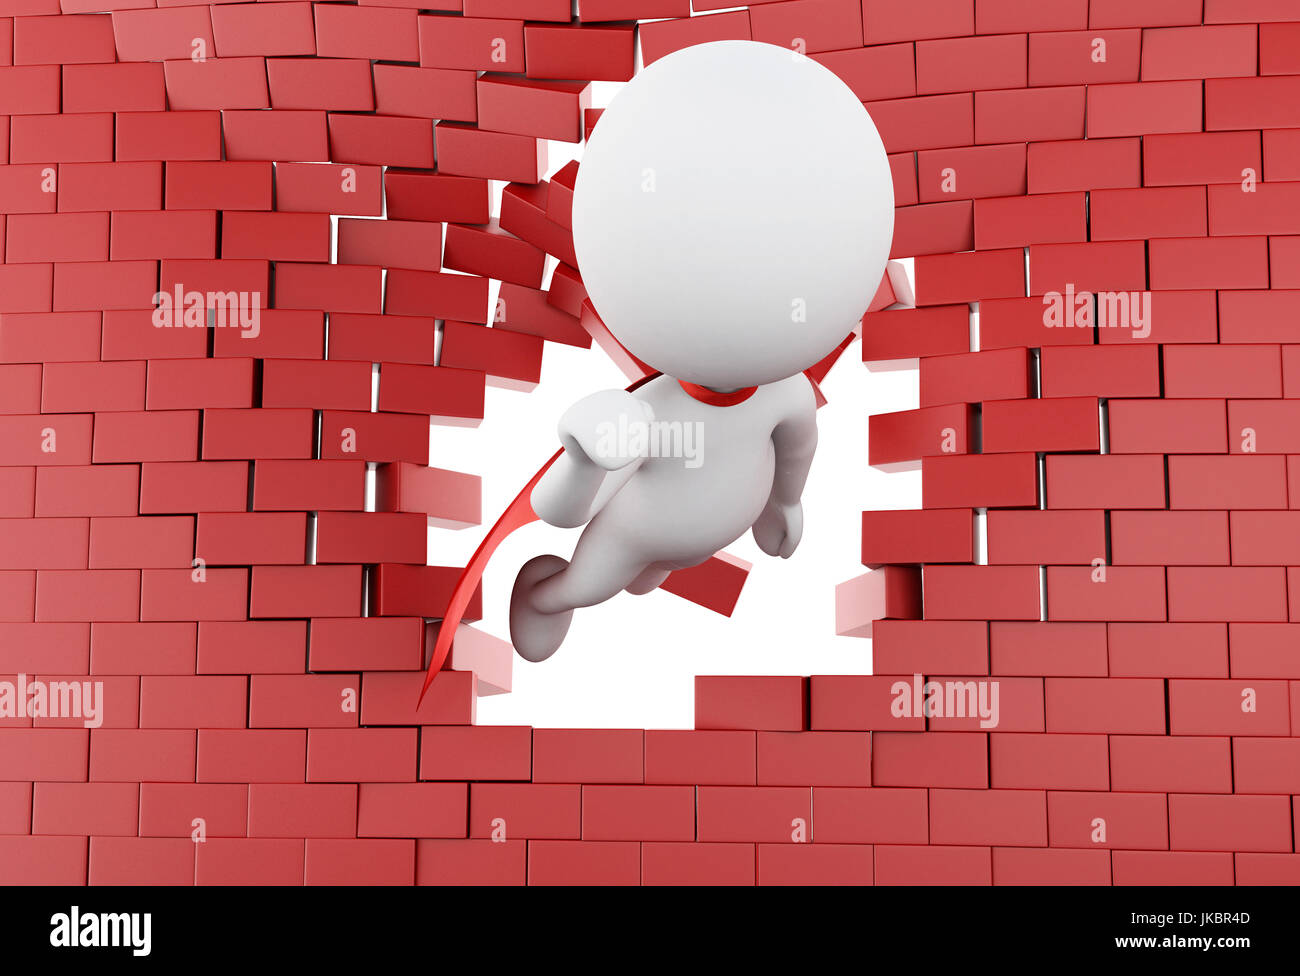 3d illustration. Super hero with red cape flying through broken brick wall. Stock Photo